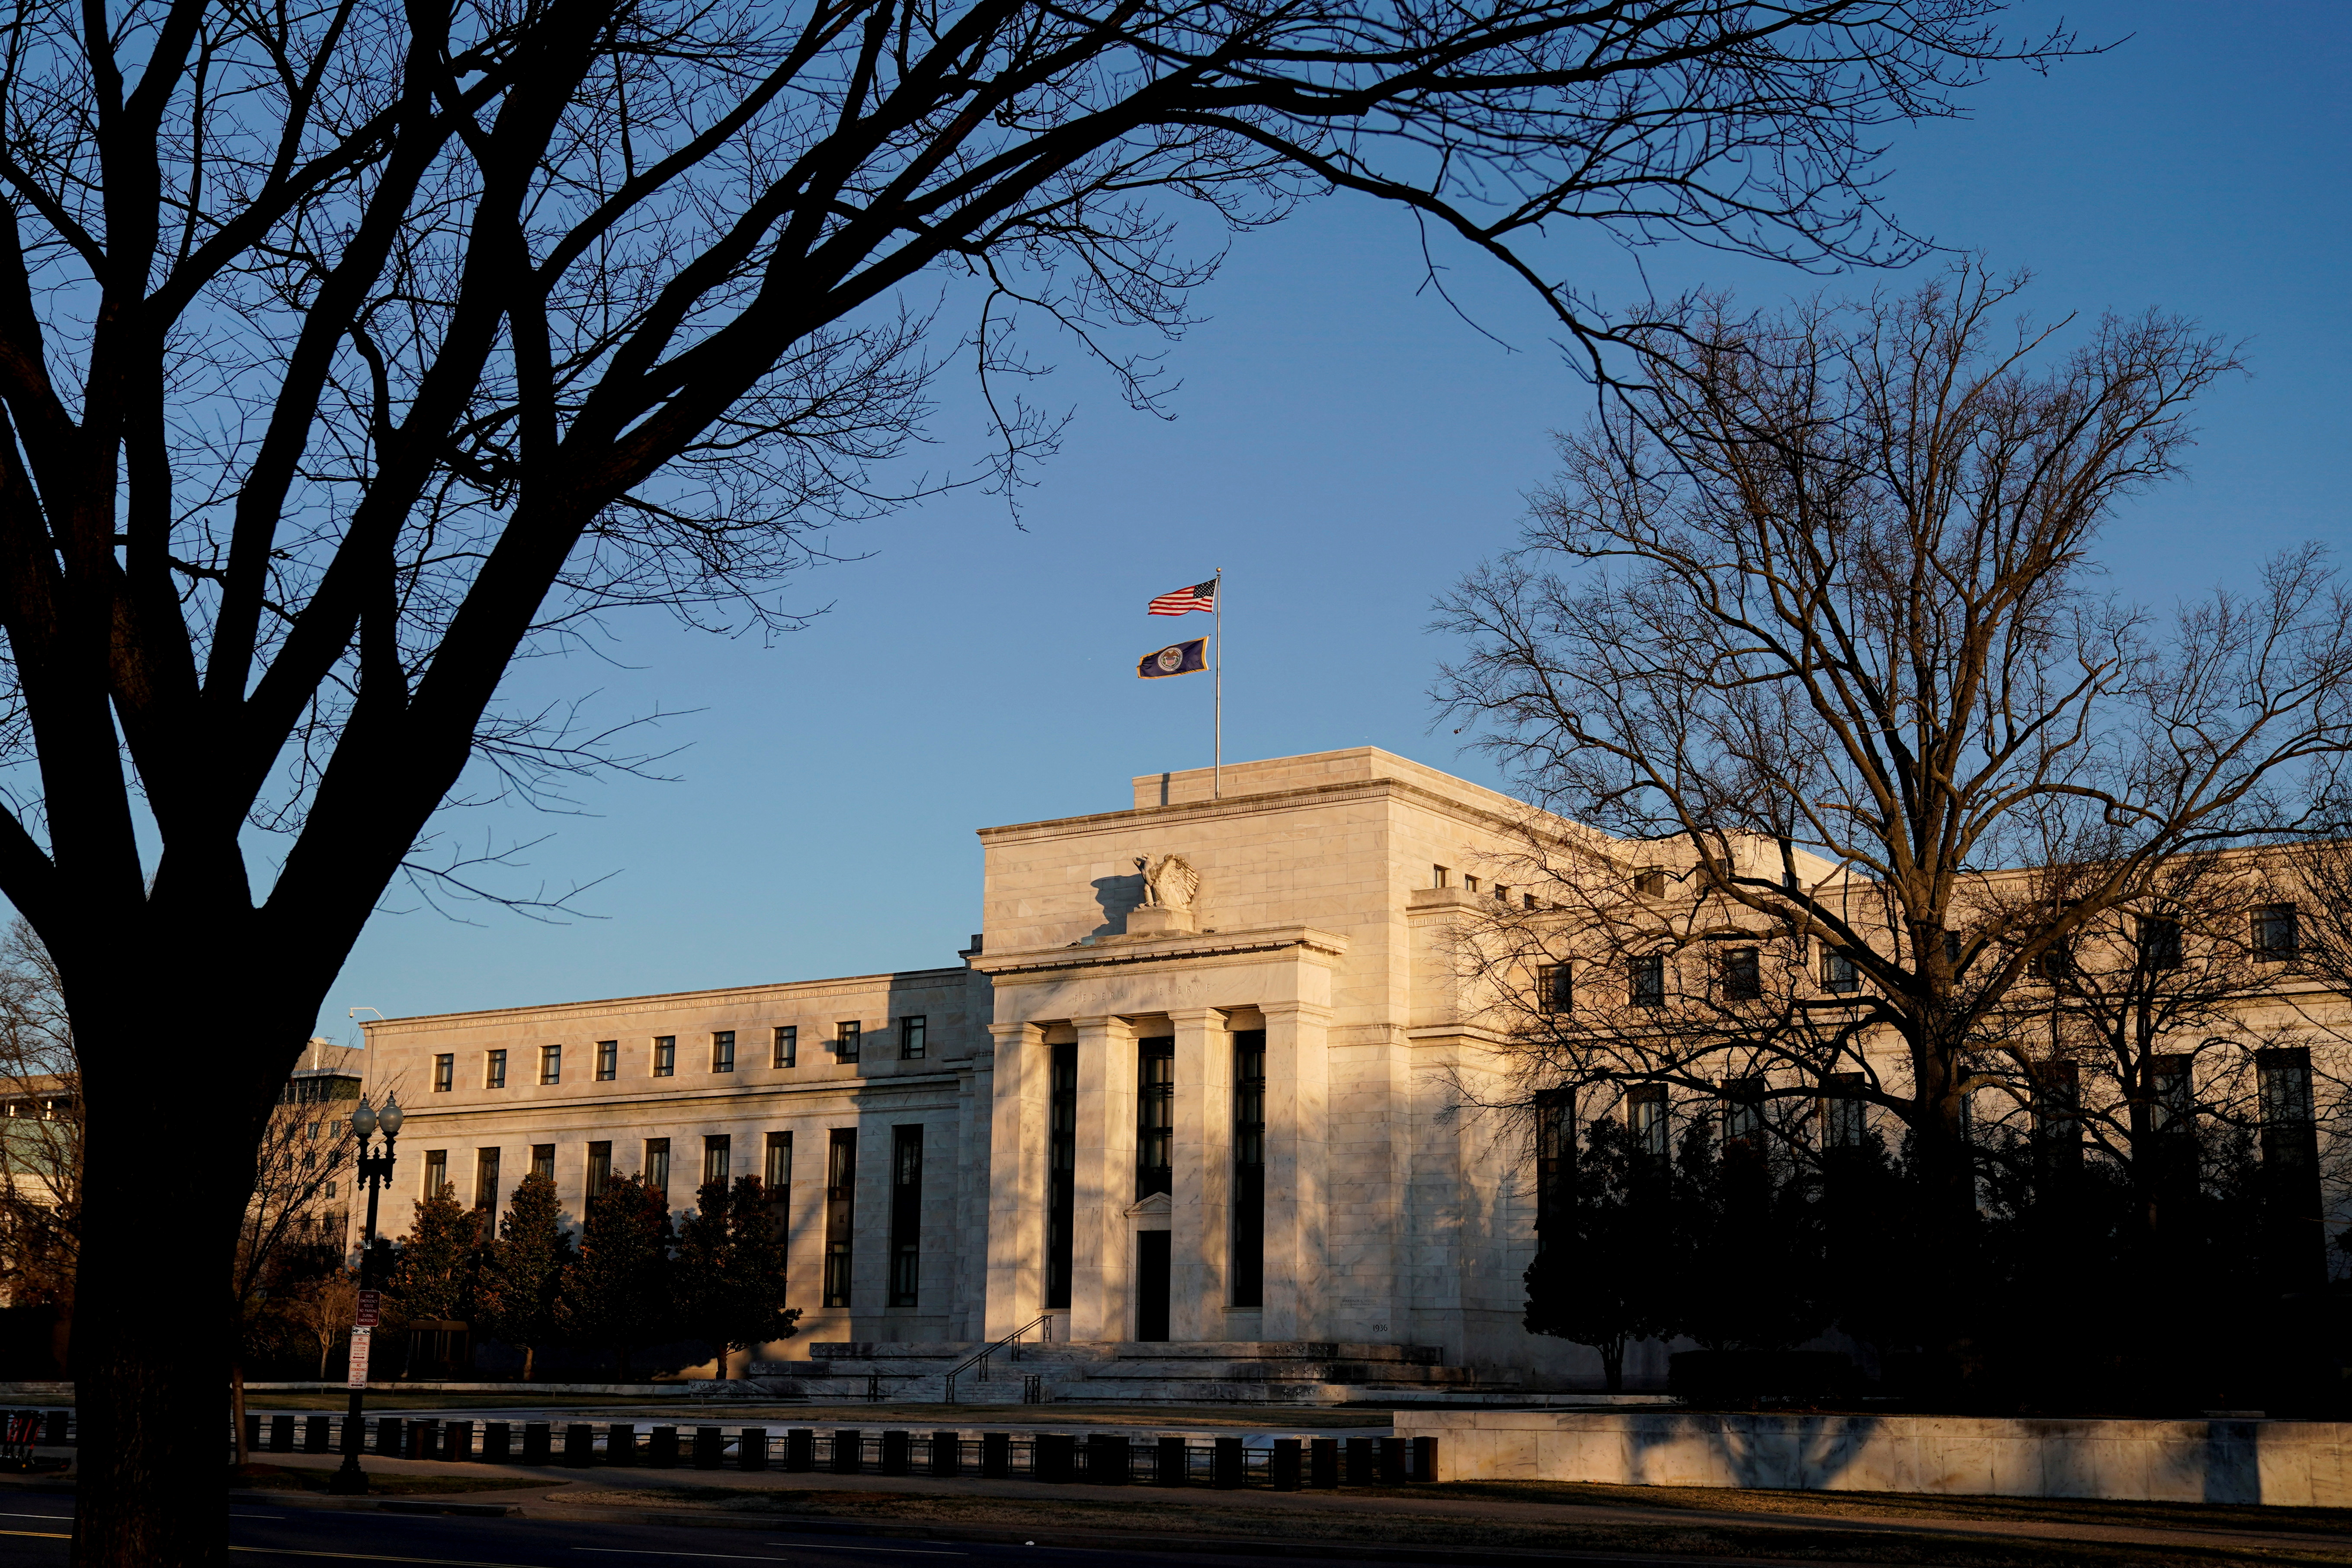 The Federal Reserve building in Washington, DC, is pictured on January 26, 2022.